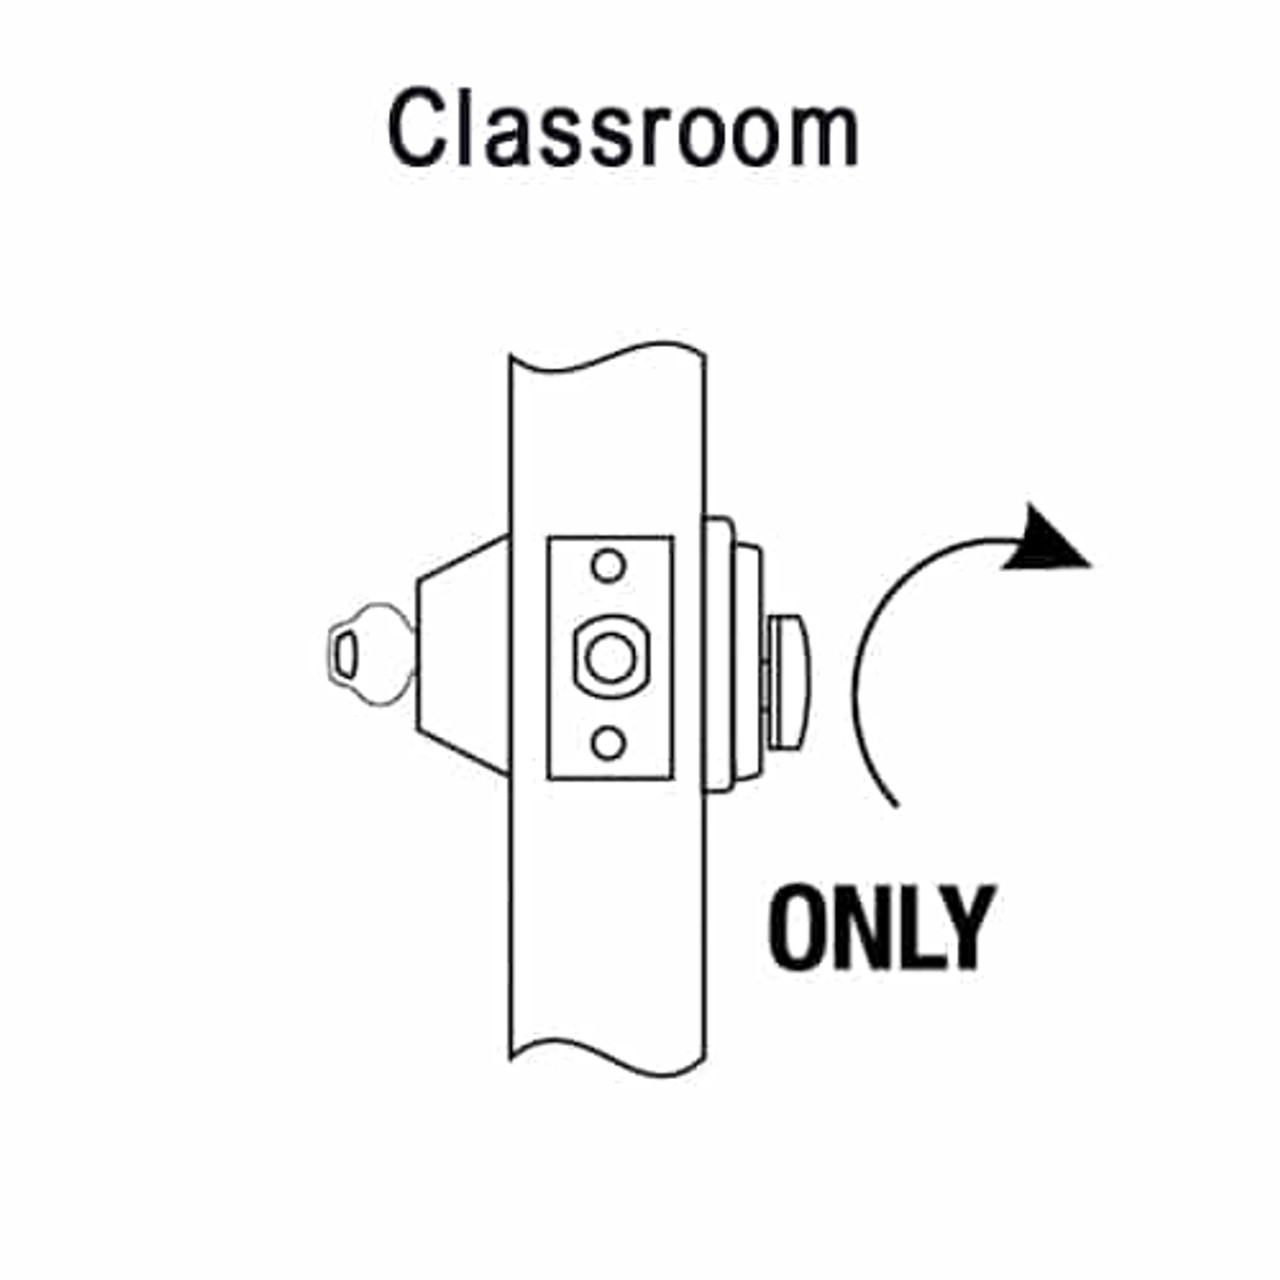 DL2217-605 Corbin DL2200 Series Classroom Cylindrical Deadlocks with Single Cylinder in Bright Brass